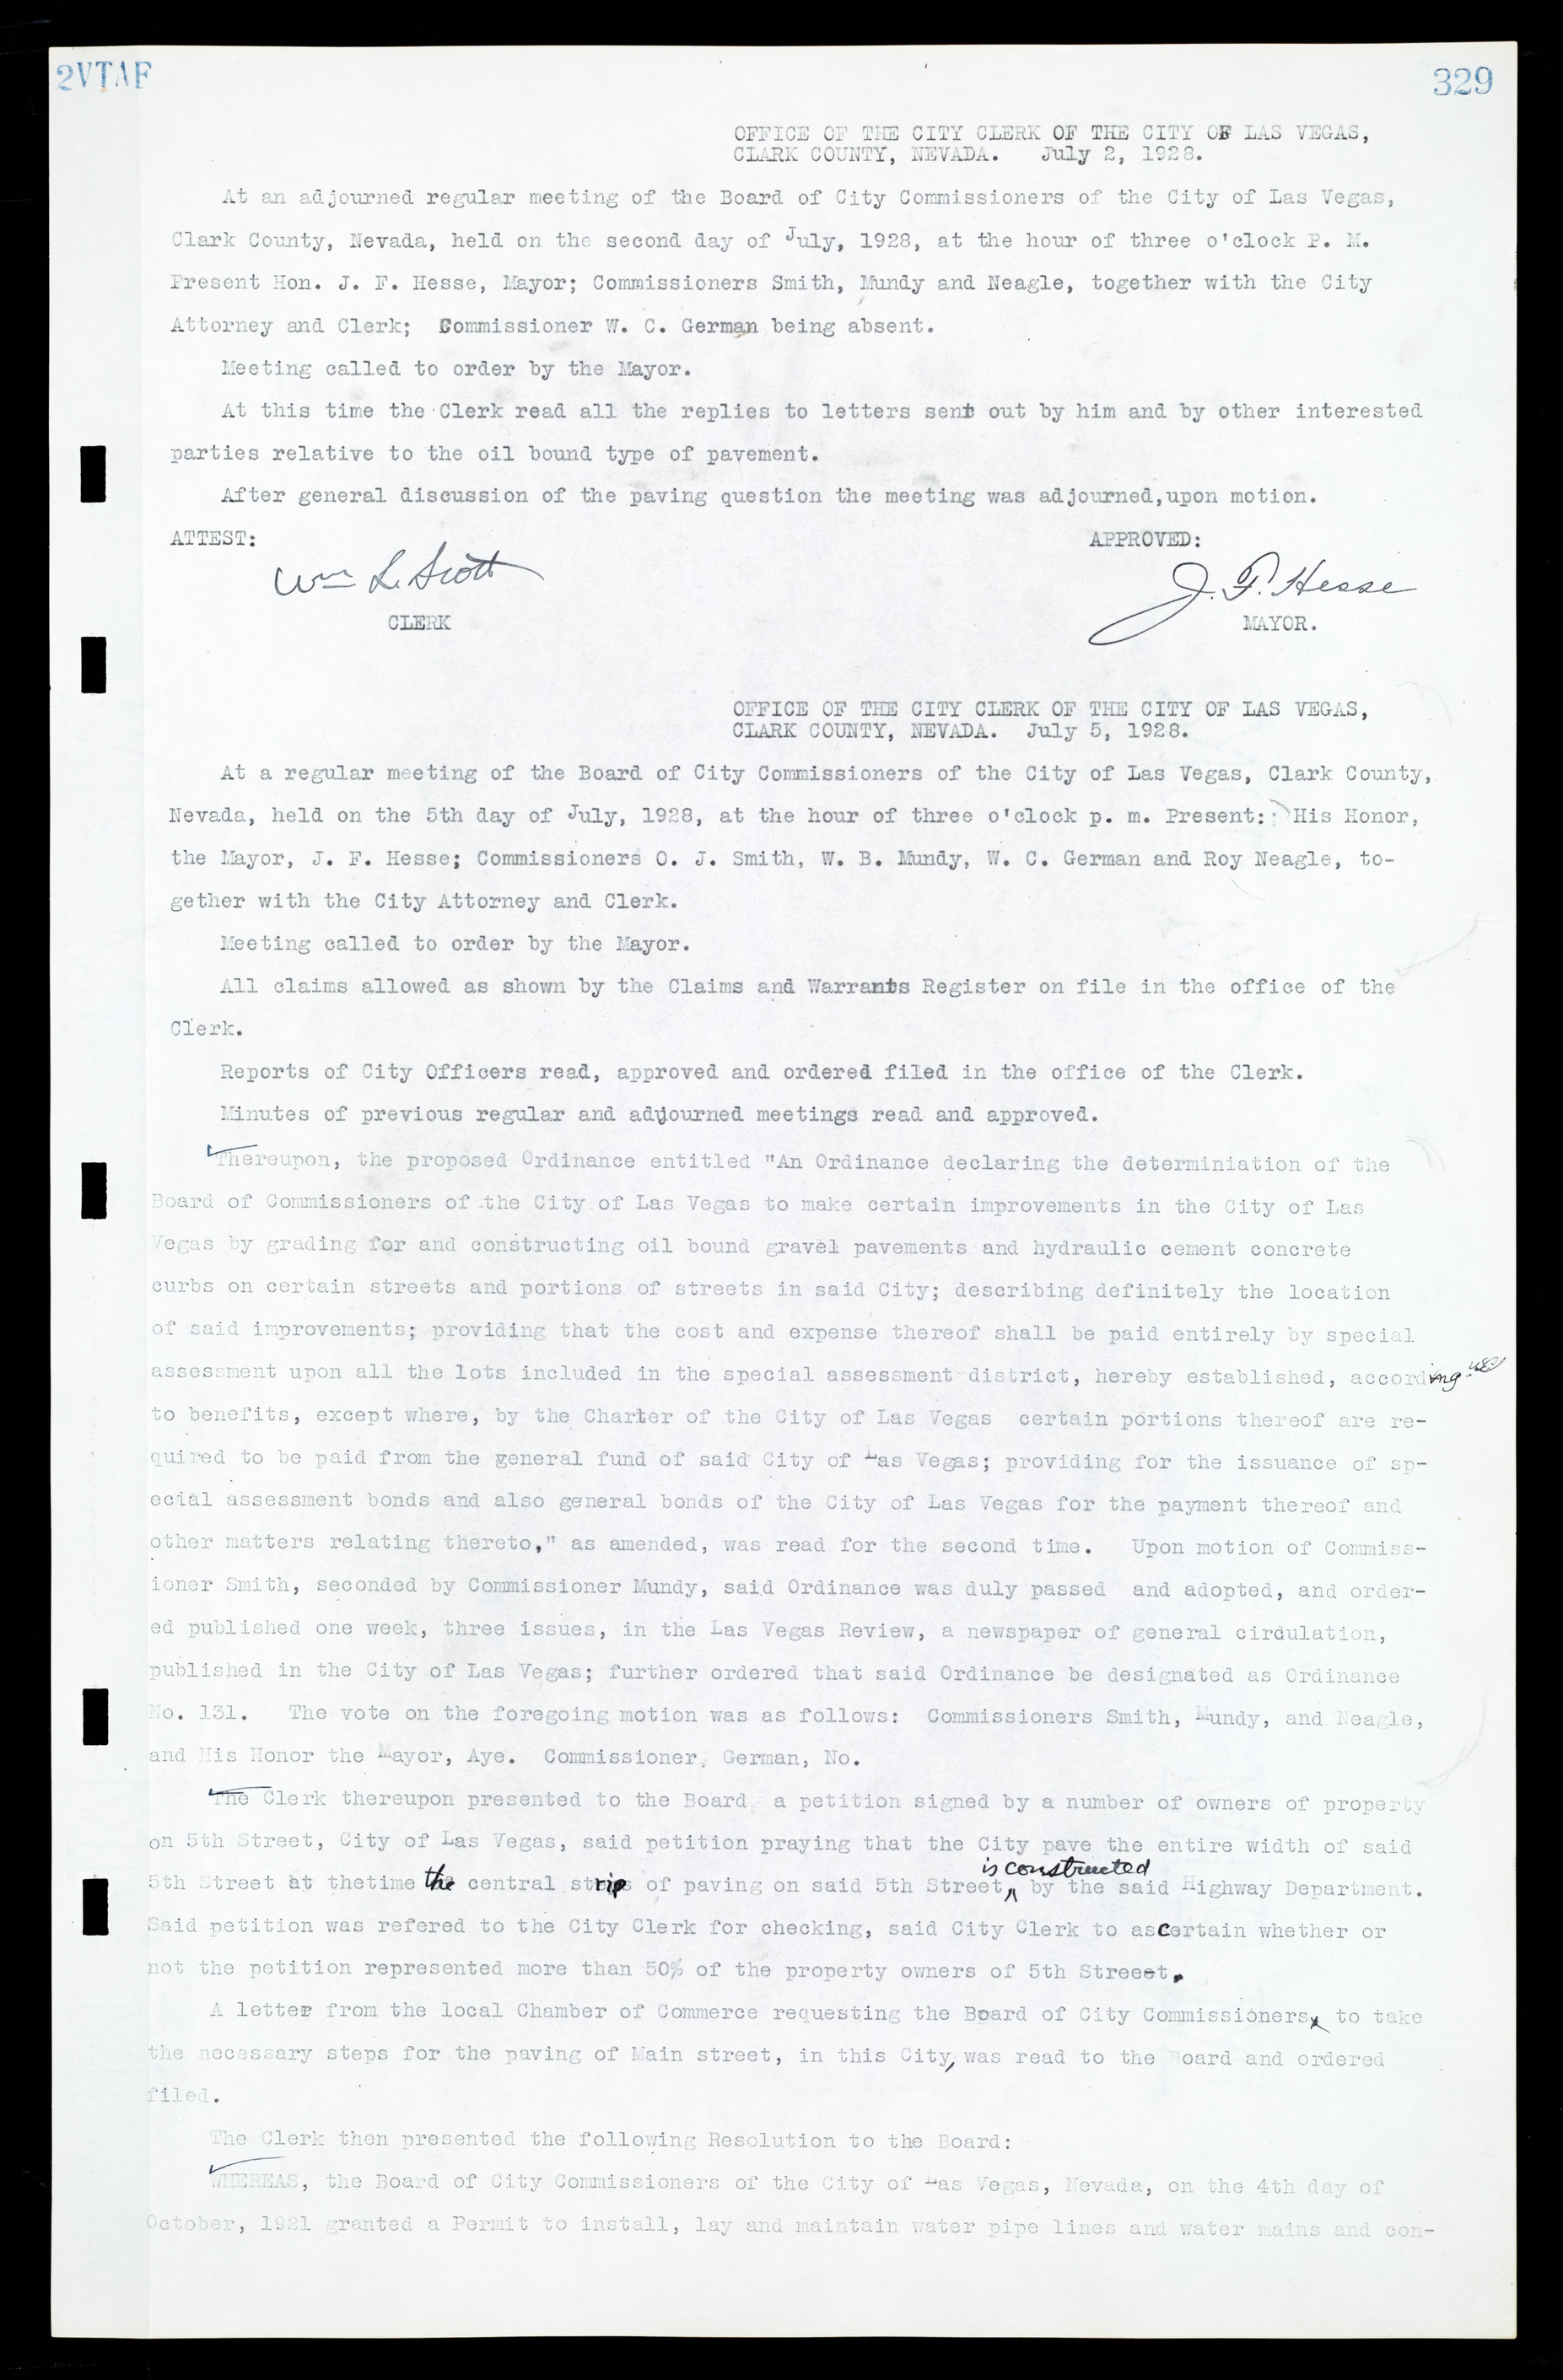 Las Vegas City Commission Minutes, March 1, 1922 to May 10, 1929, lvc000002-338